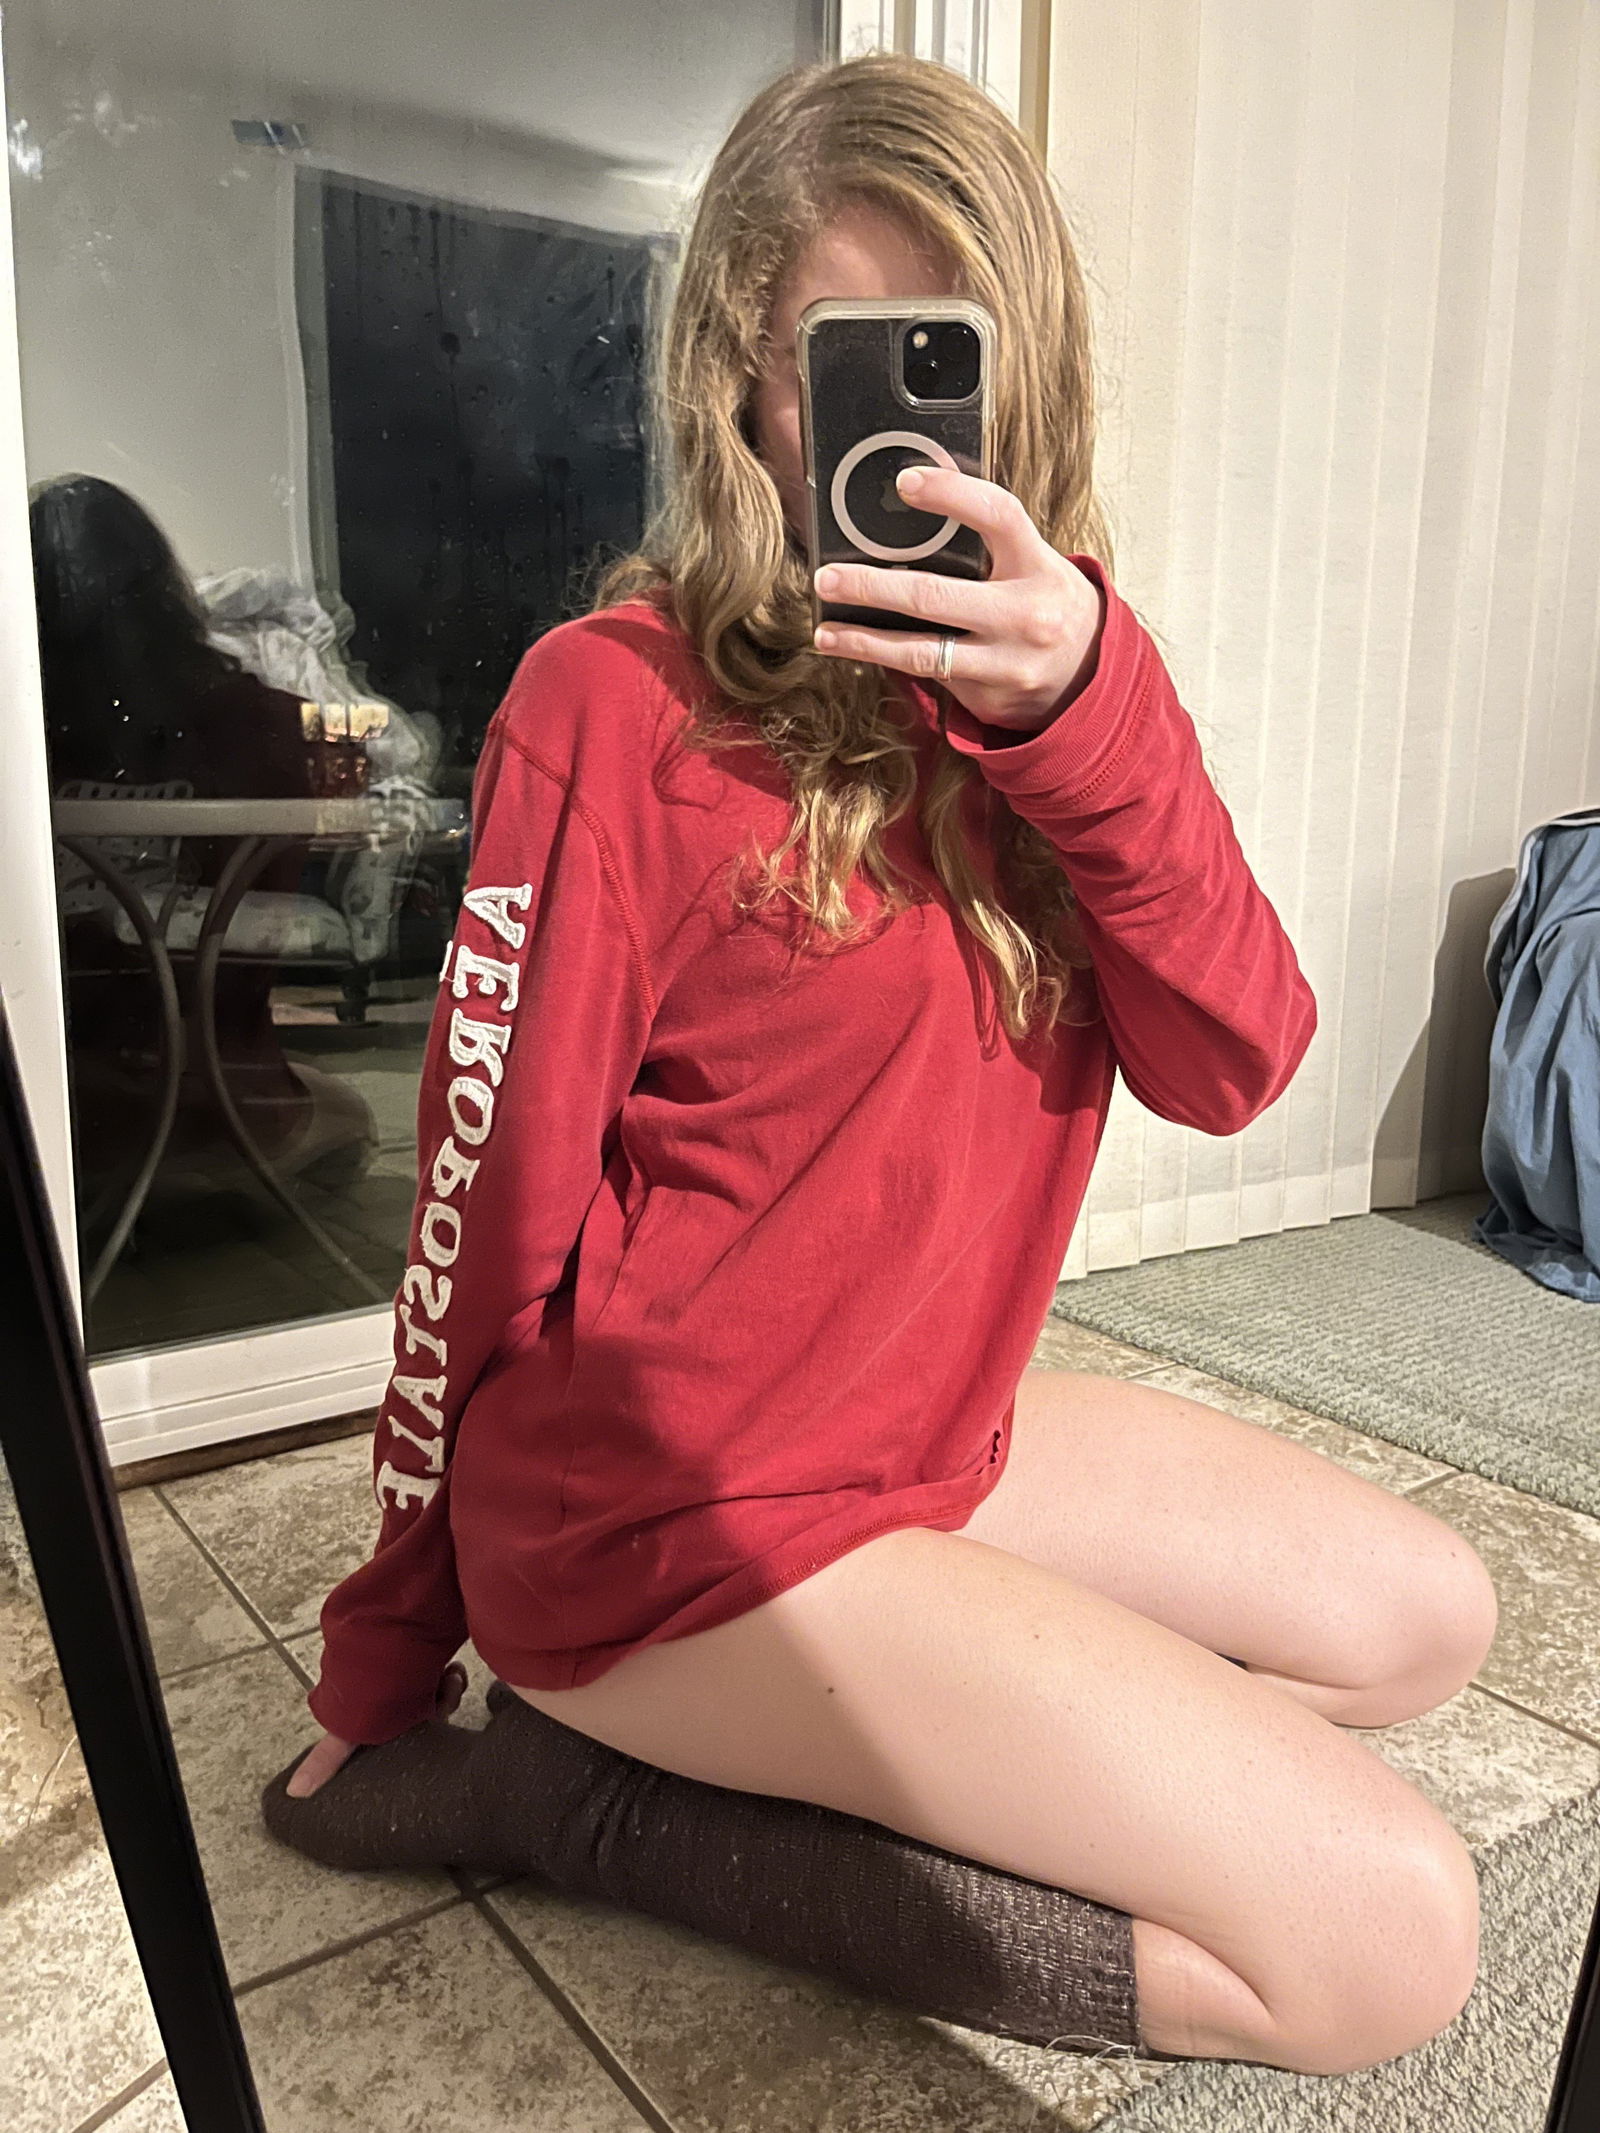 Photo by Evasummers with the username @Evasummers, who is a star user,  November 6, 2023 at 1:48 AM. The post is about the topic OnlyFans and the text says 'Subscribe to unlock exclusive content 😉

My favorite clothes to chill in: no bottoms, just a long shirt and long socks 😏

https://onlyfans.com/eva.summers

https://fansly.com/EvaSummers/posts


https://www.fanvue.com/eva-summers


#girls..'